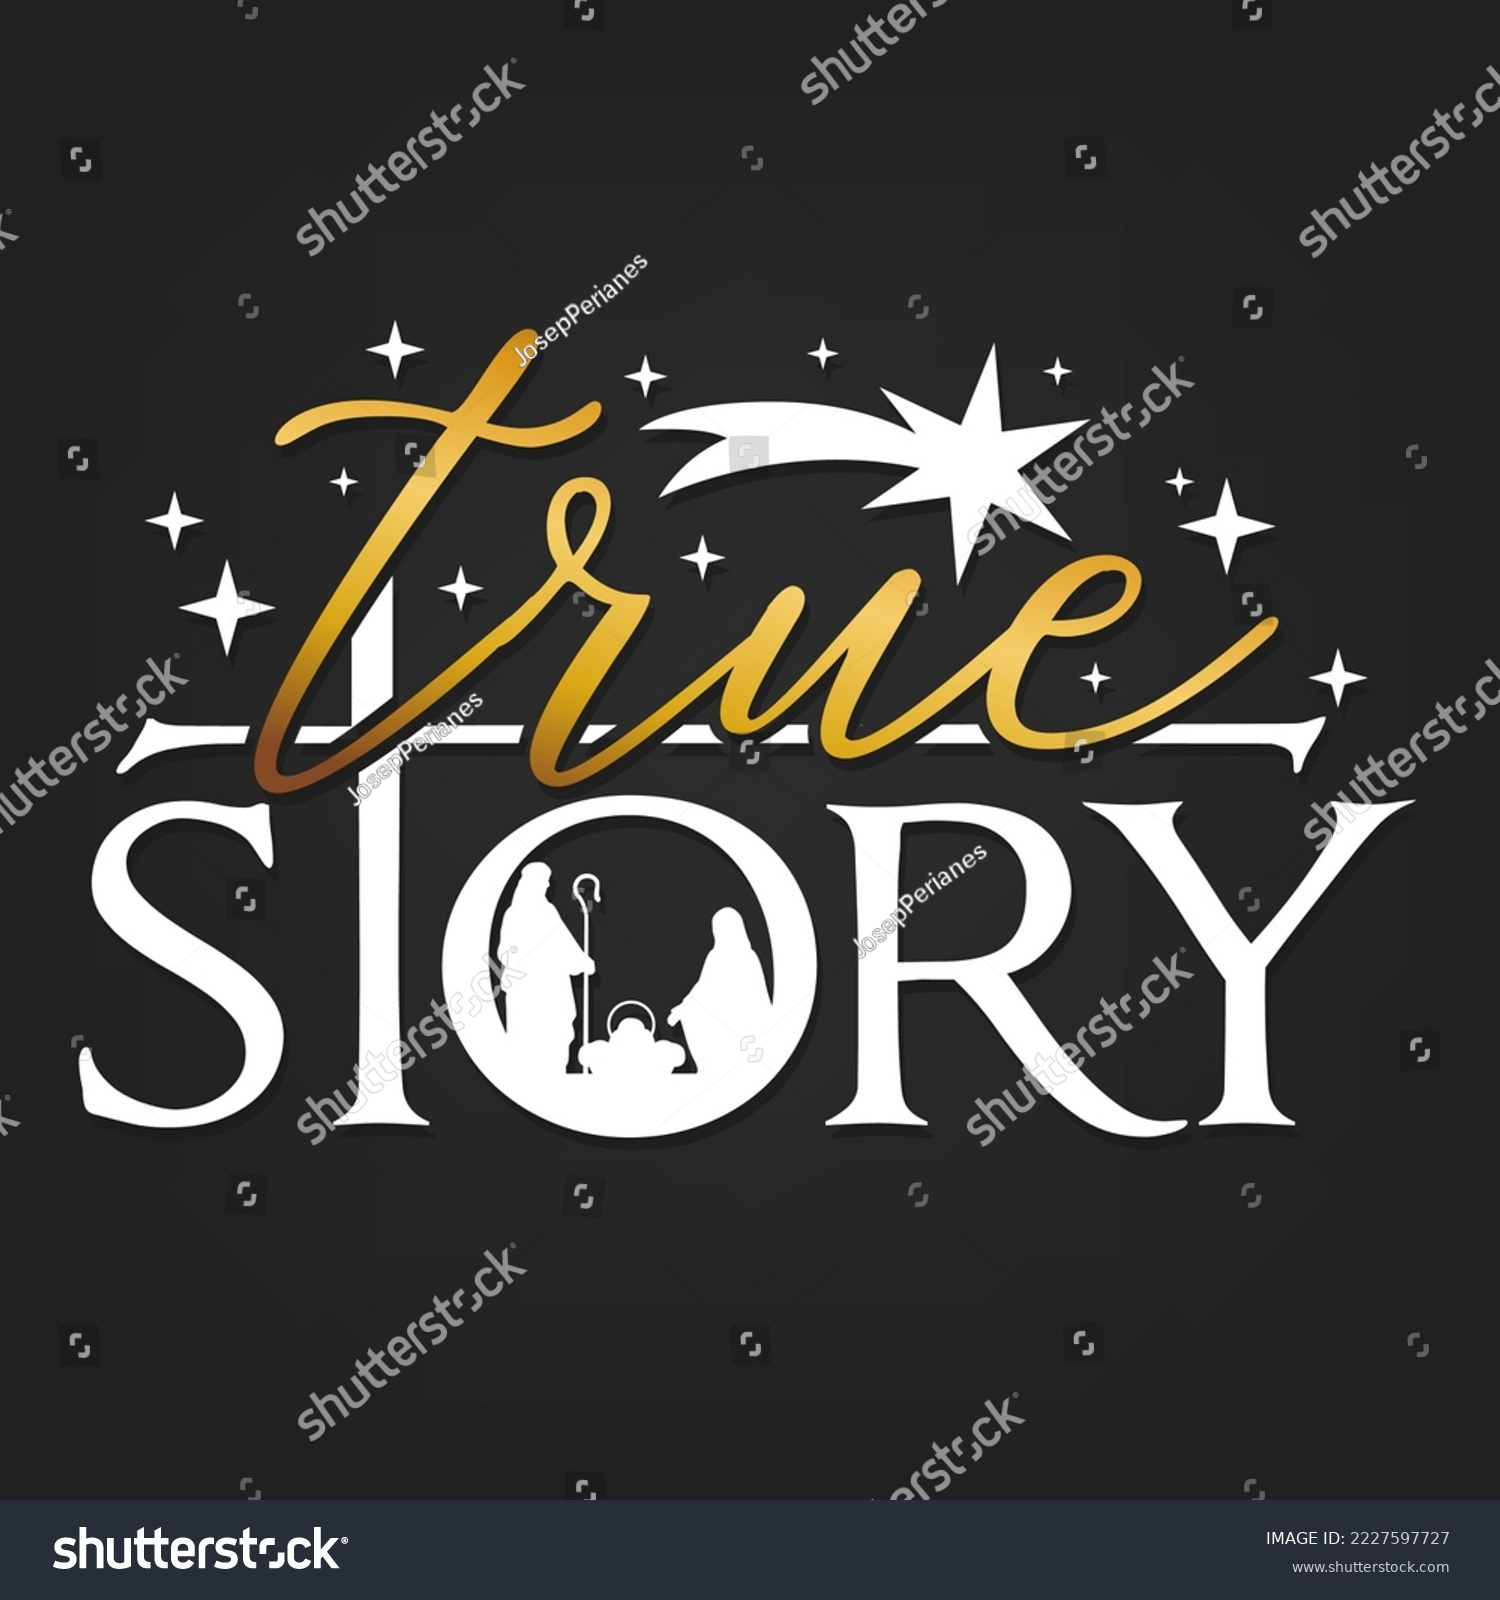 SVG of True Story Nativity Scene Silhouette. Holidays Christmas Religion. Holly Night Characters. Cut File Design. Vector Clip Art. svg